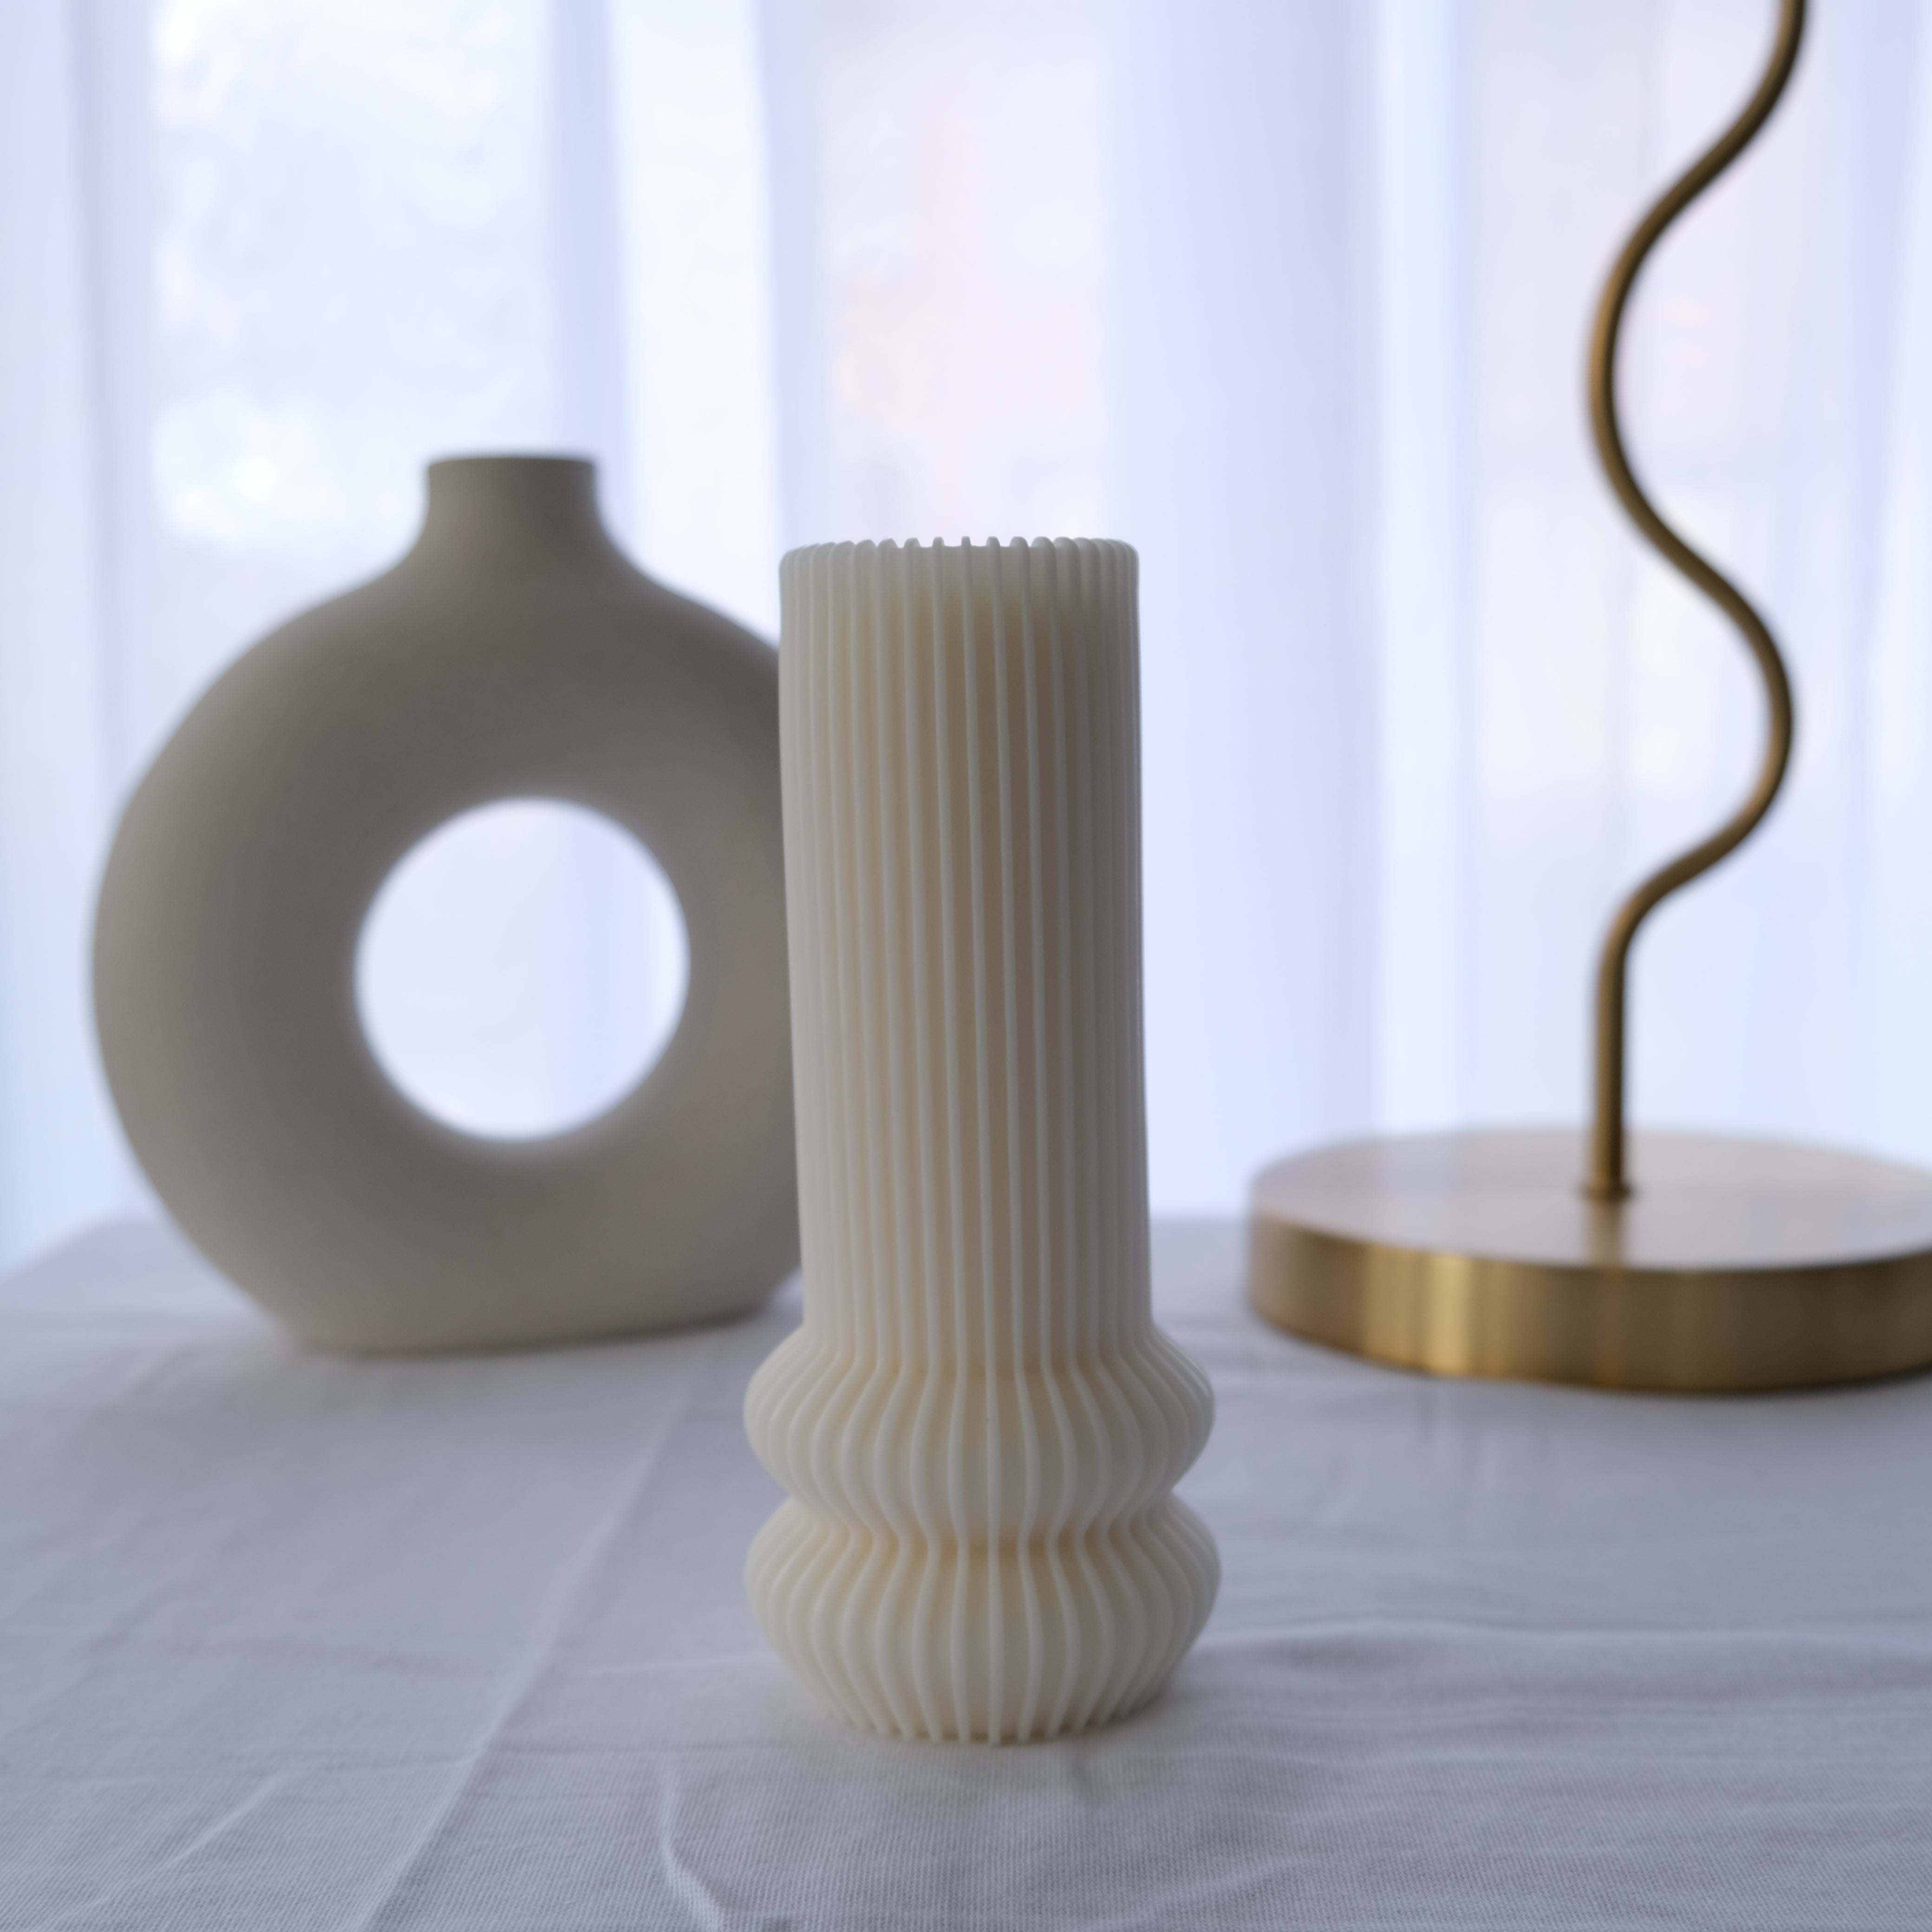 Nordic Vase Candle Moulds 1 - Silicone Mould, Mold for DIY Candles. Created using candle making kit with cotton candle wicks and candle colour chips. Using soy wax for pillar candles. Sold by Myka Candles Moulds Australia